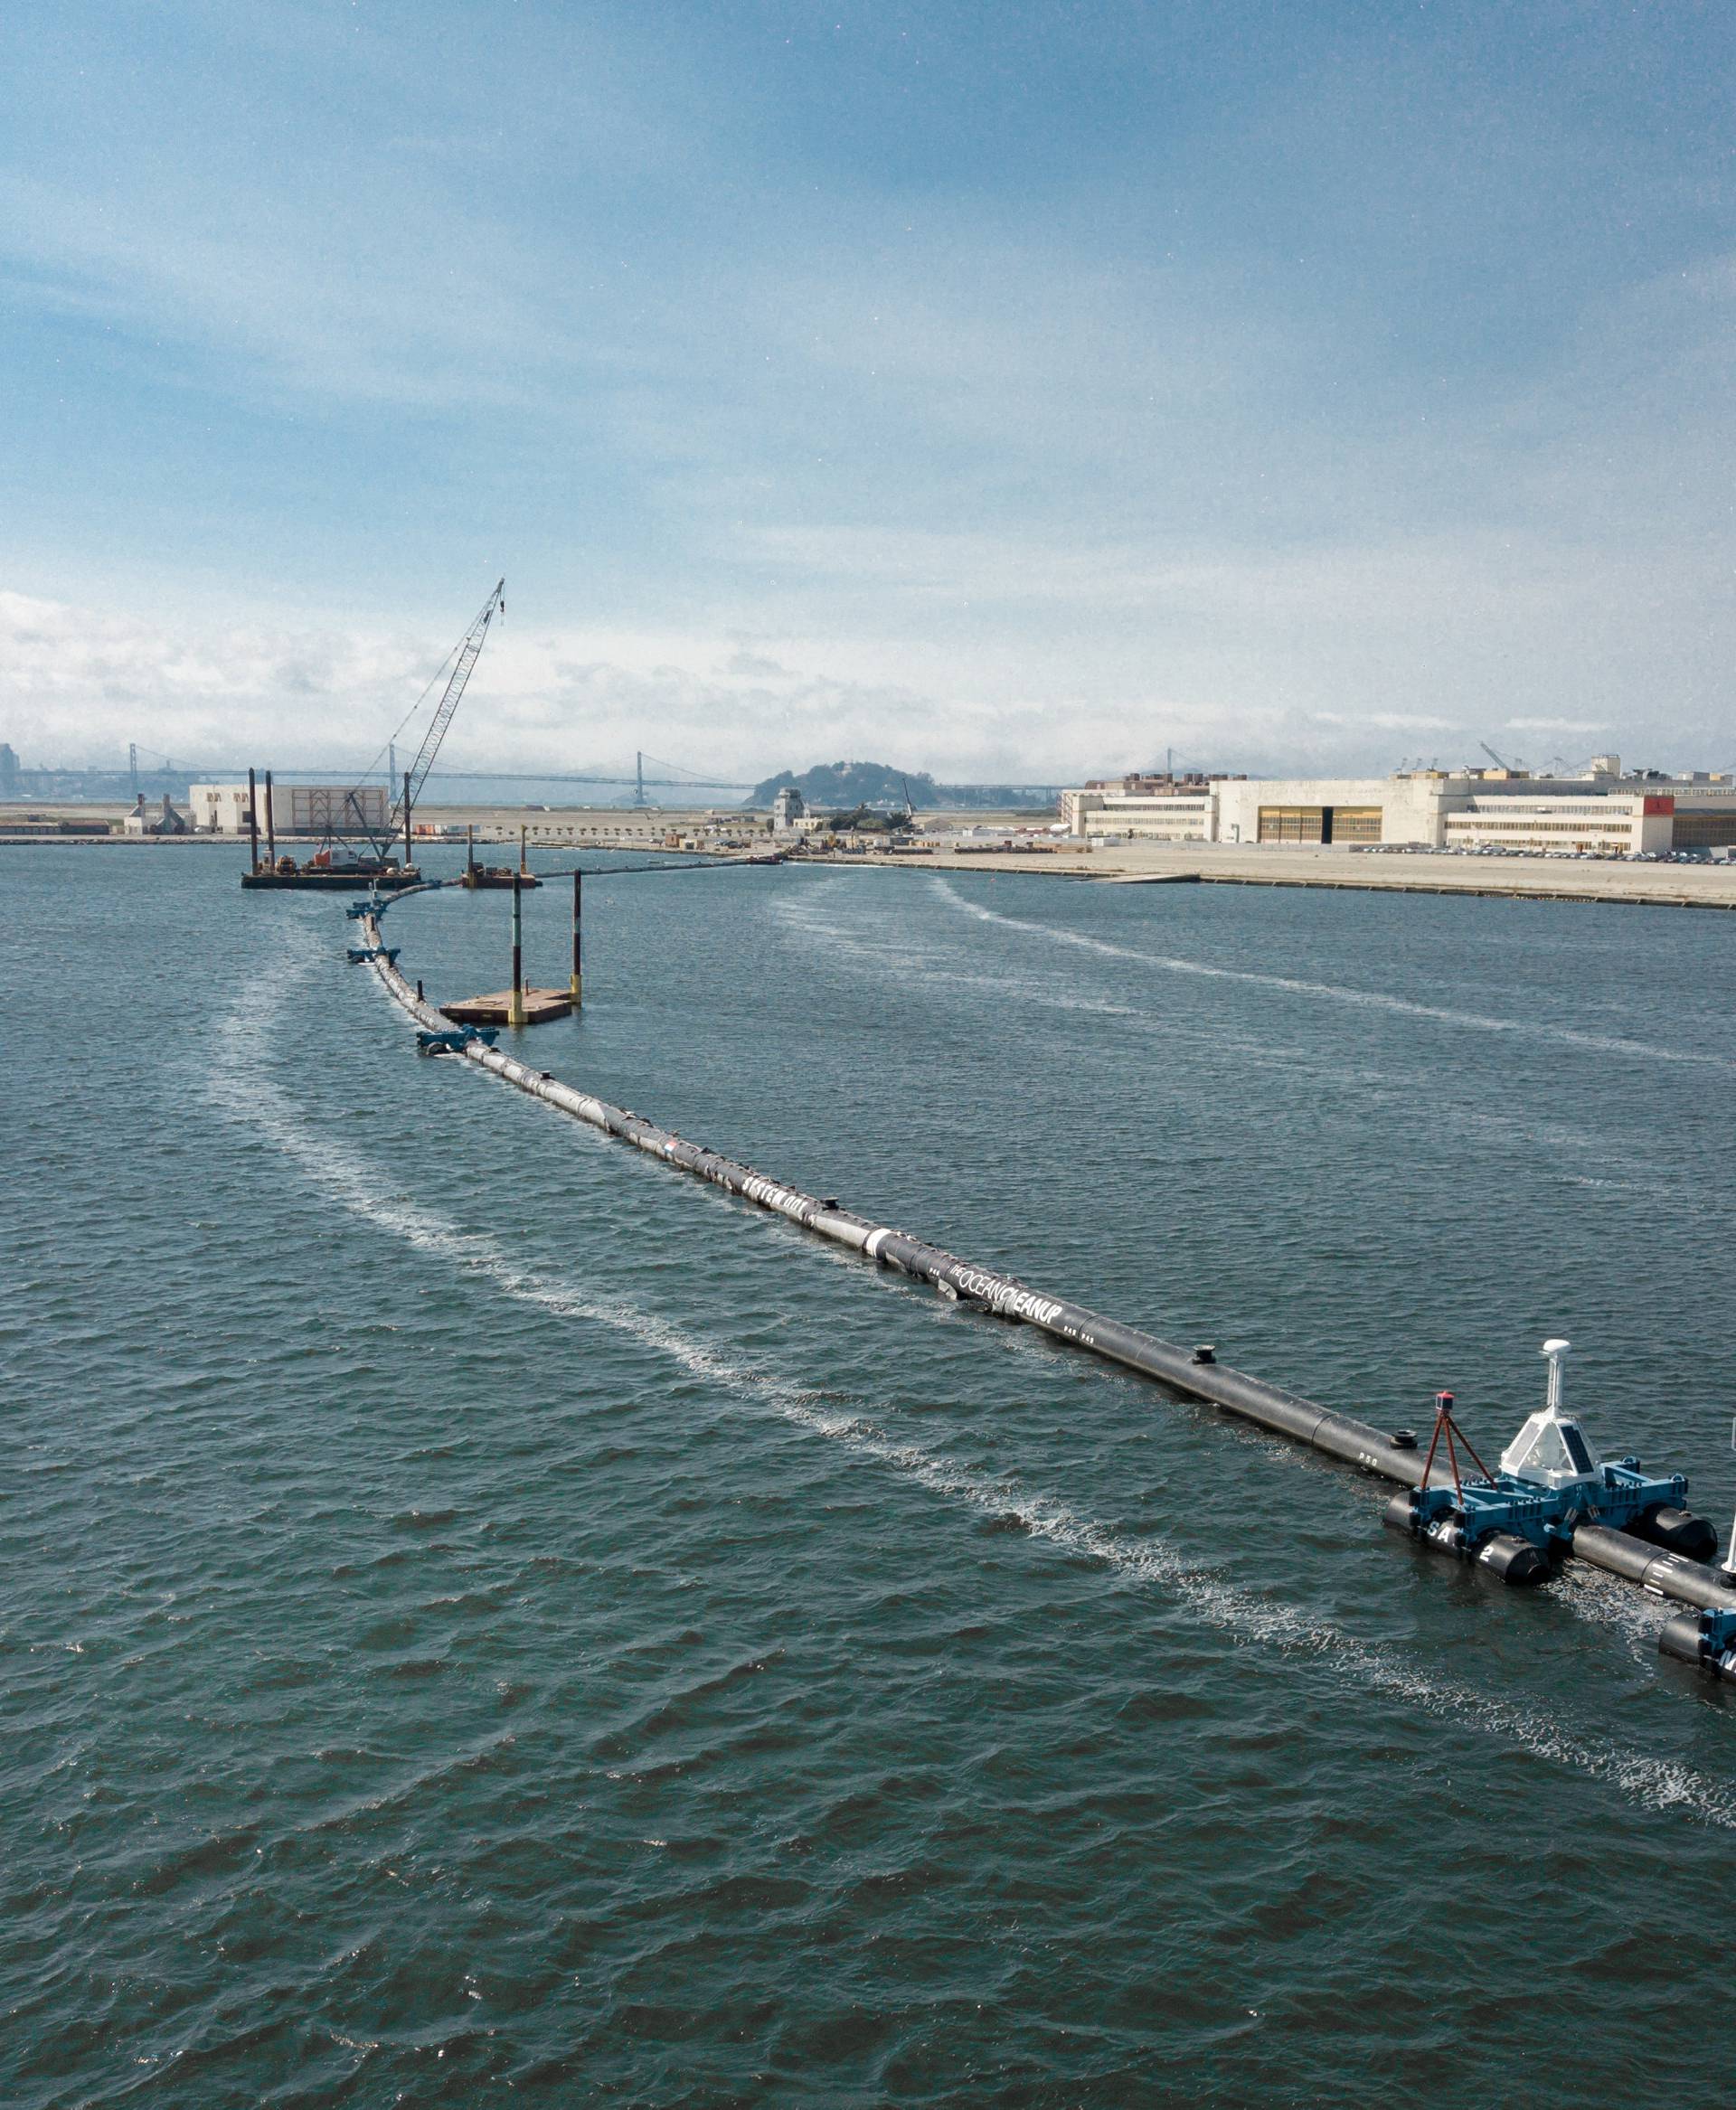 System 001, an ocean cleanup system that aims at removing plastic from the ocean, on the final day of the attachment of the screen in the water in Alameda